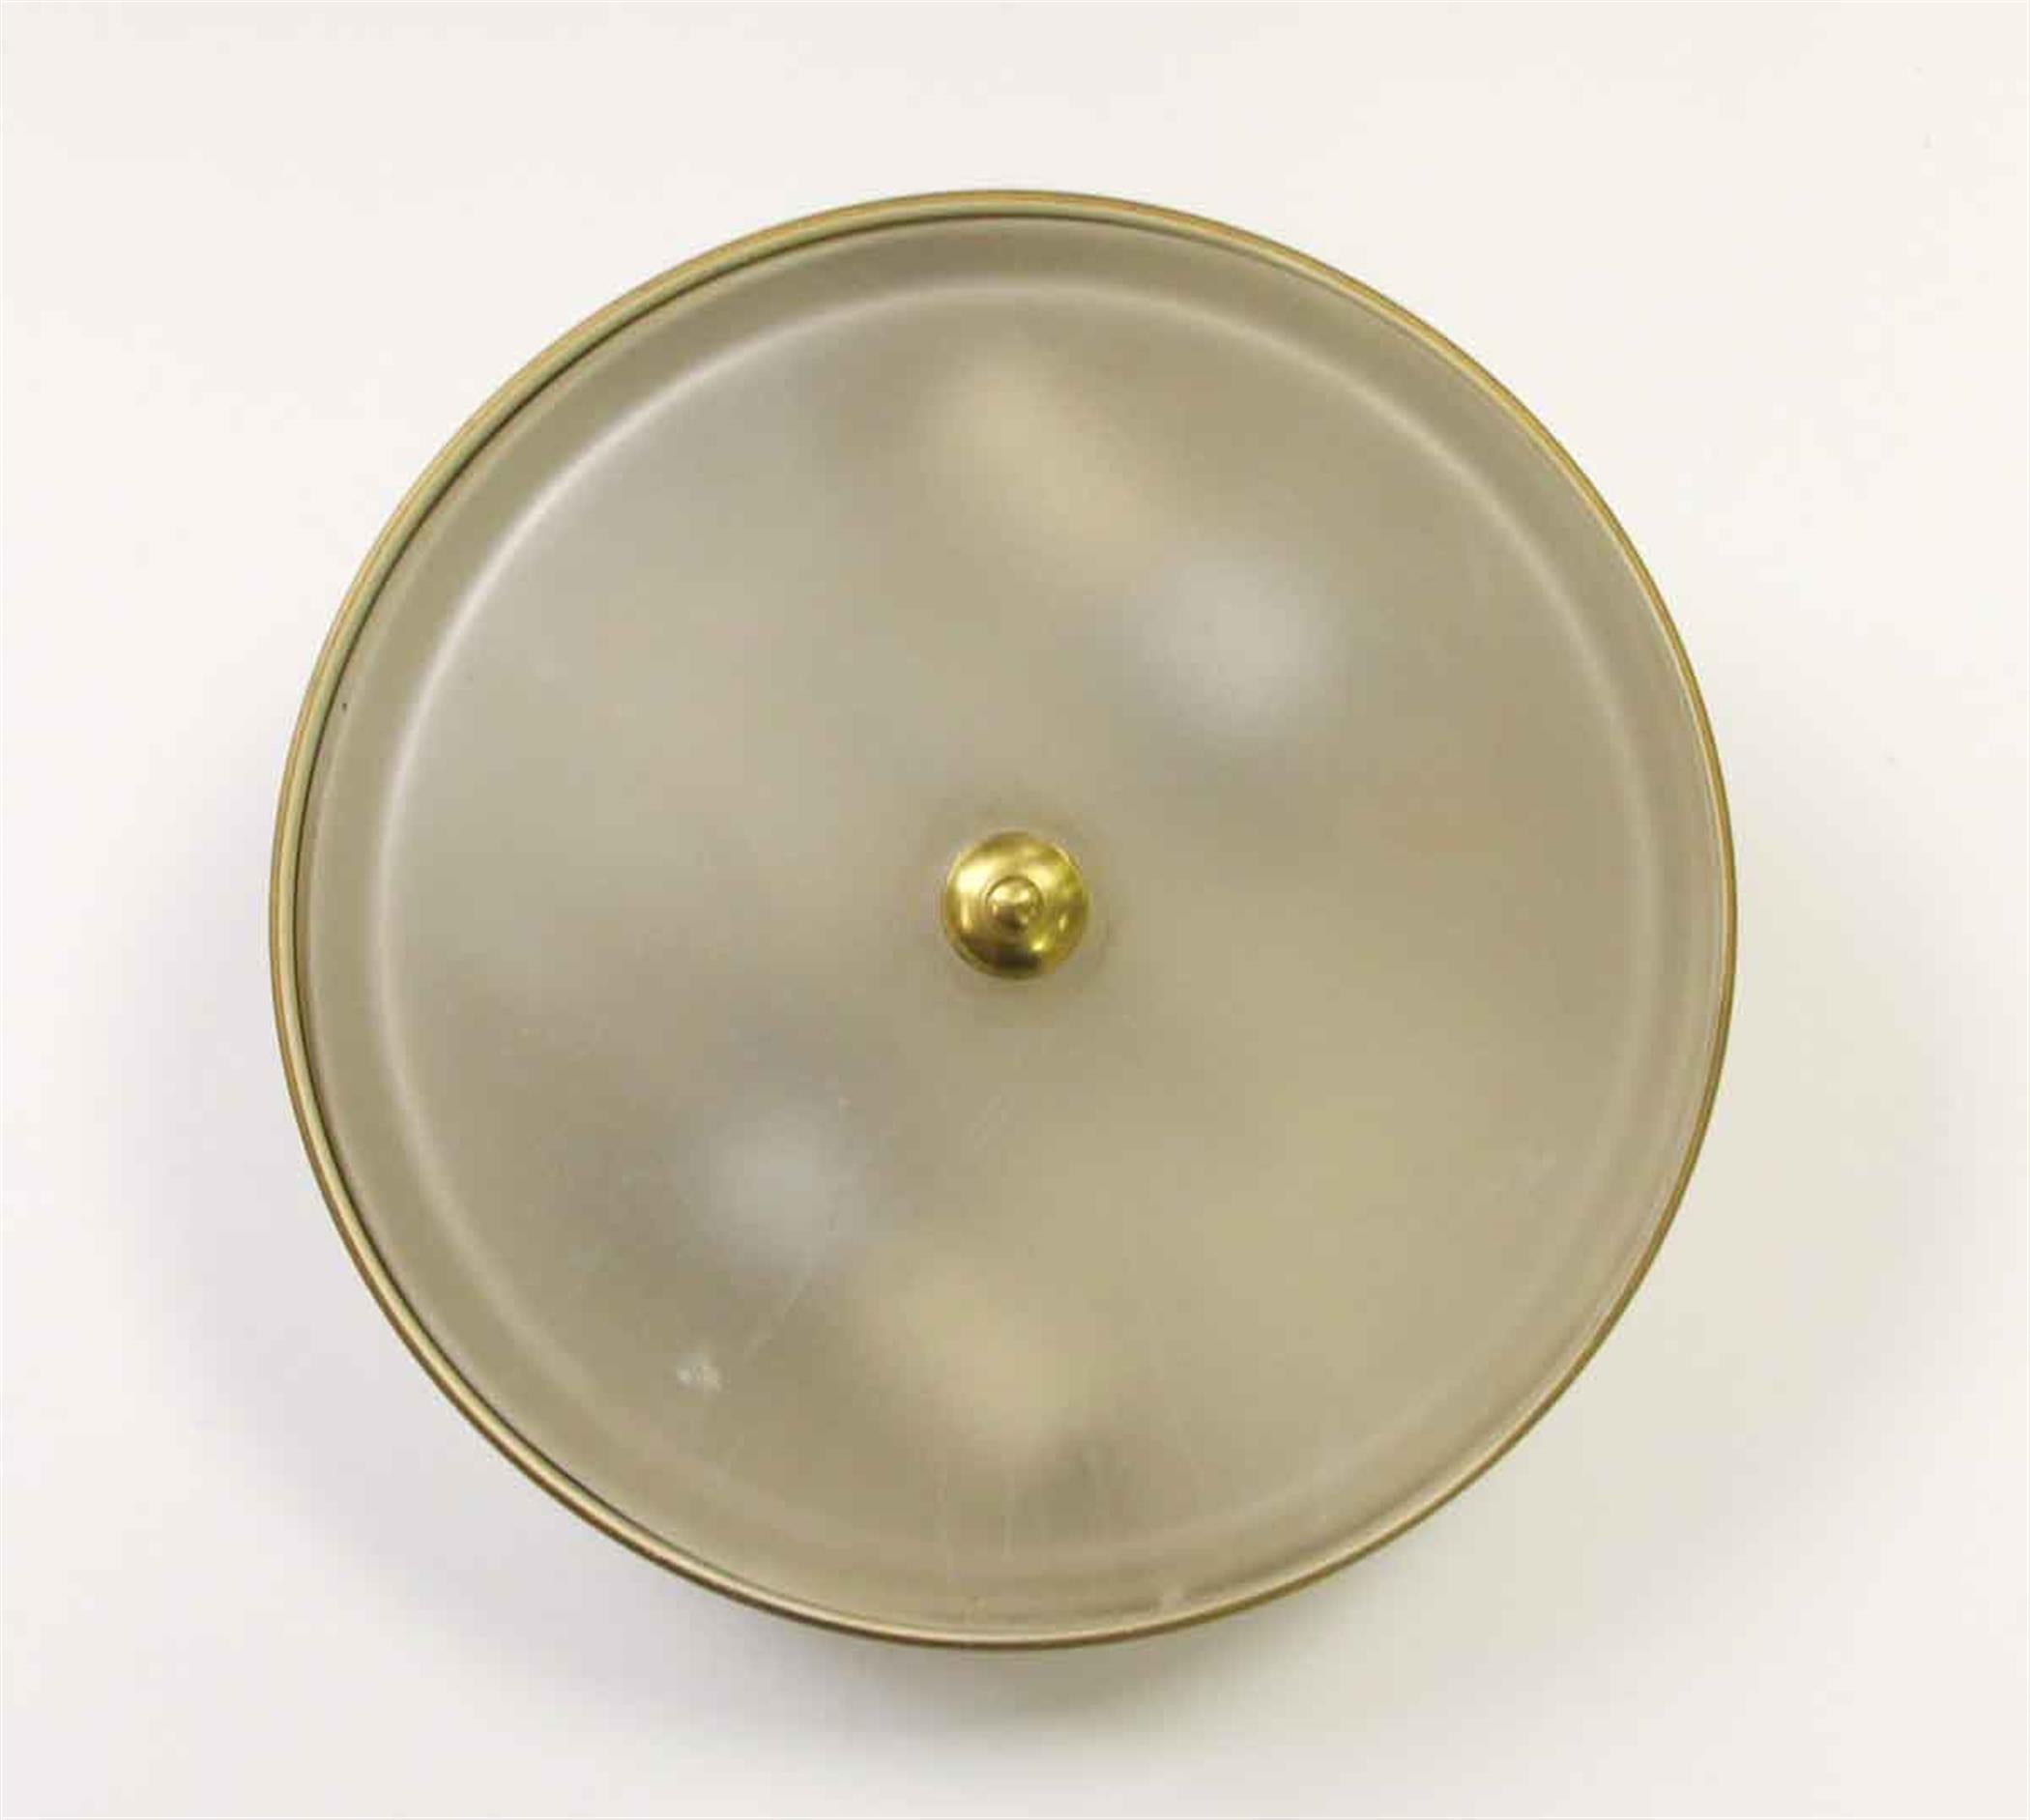 From the 20th Century NYC Waldorf Astoria Hotel. Simple Mid-Century Modern pill box design flush mount light with frosted glass. This fixture is hand painted in a beige tone with gold gilt rim. A Waldorf Astoria authenticity card included with your